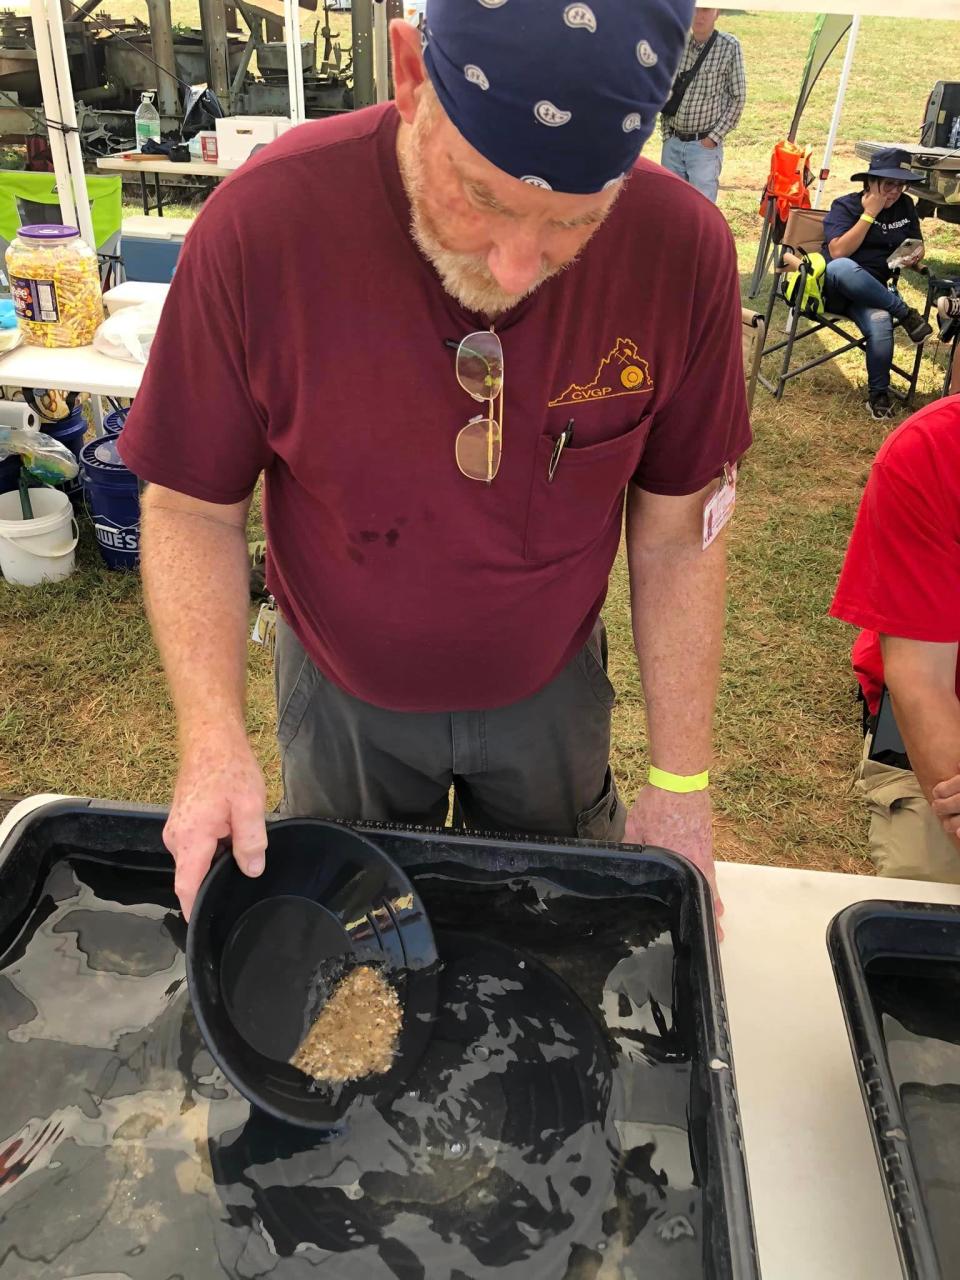 Central Virginia Gold Prospectors member David Shaw of Goochland pans gold at Field Day of the Past 2022 in Amelia.